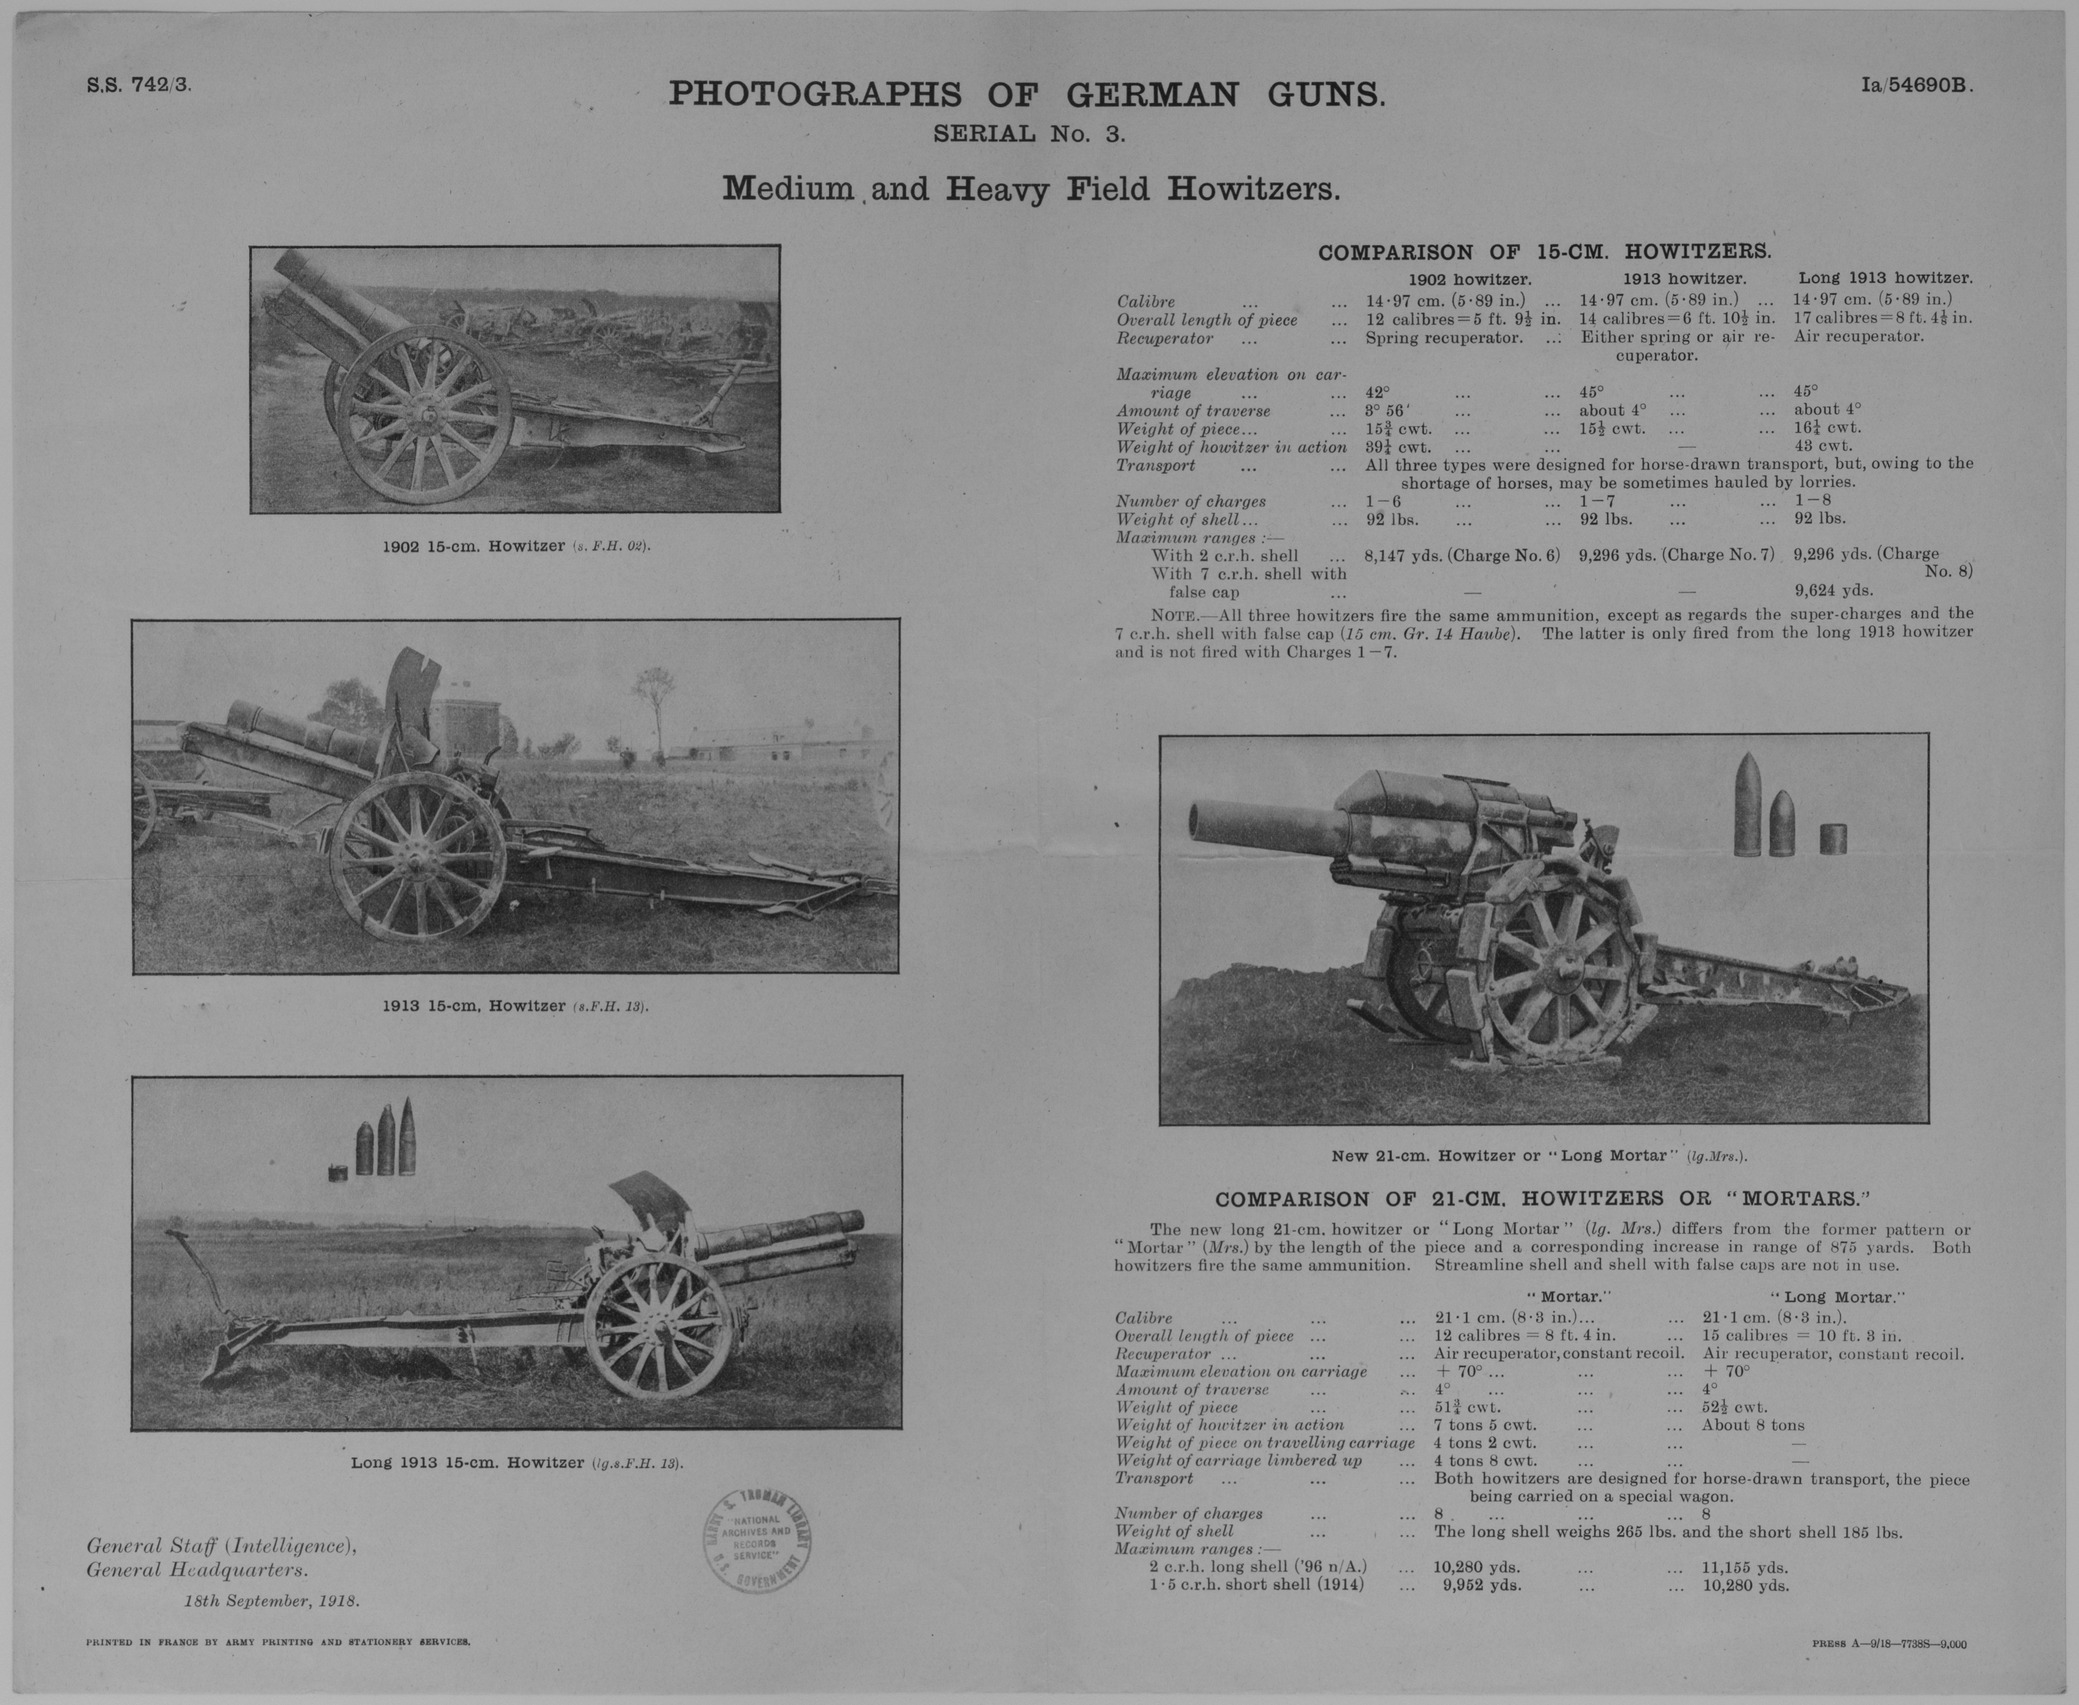 Chart, Photographs of German Guns, Serial Number 3, Medium and Heavy Field Howitzers